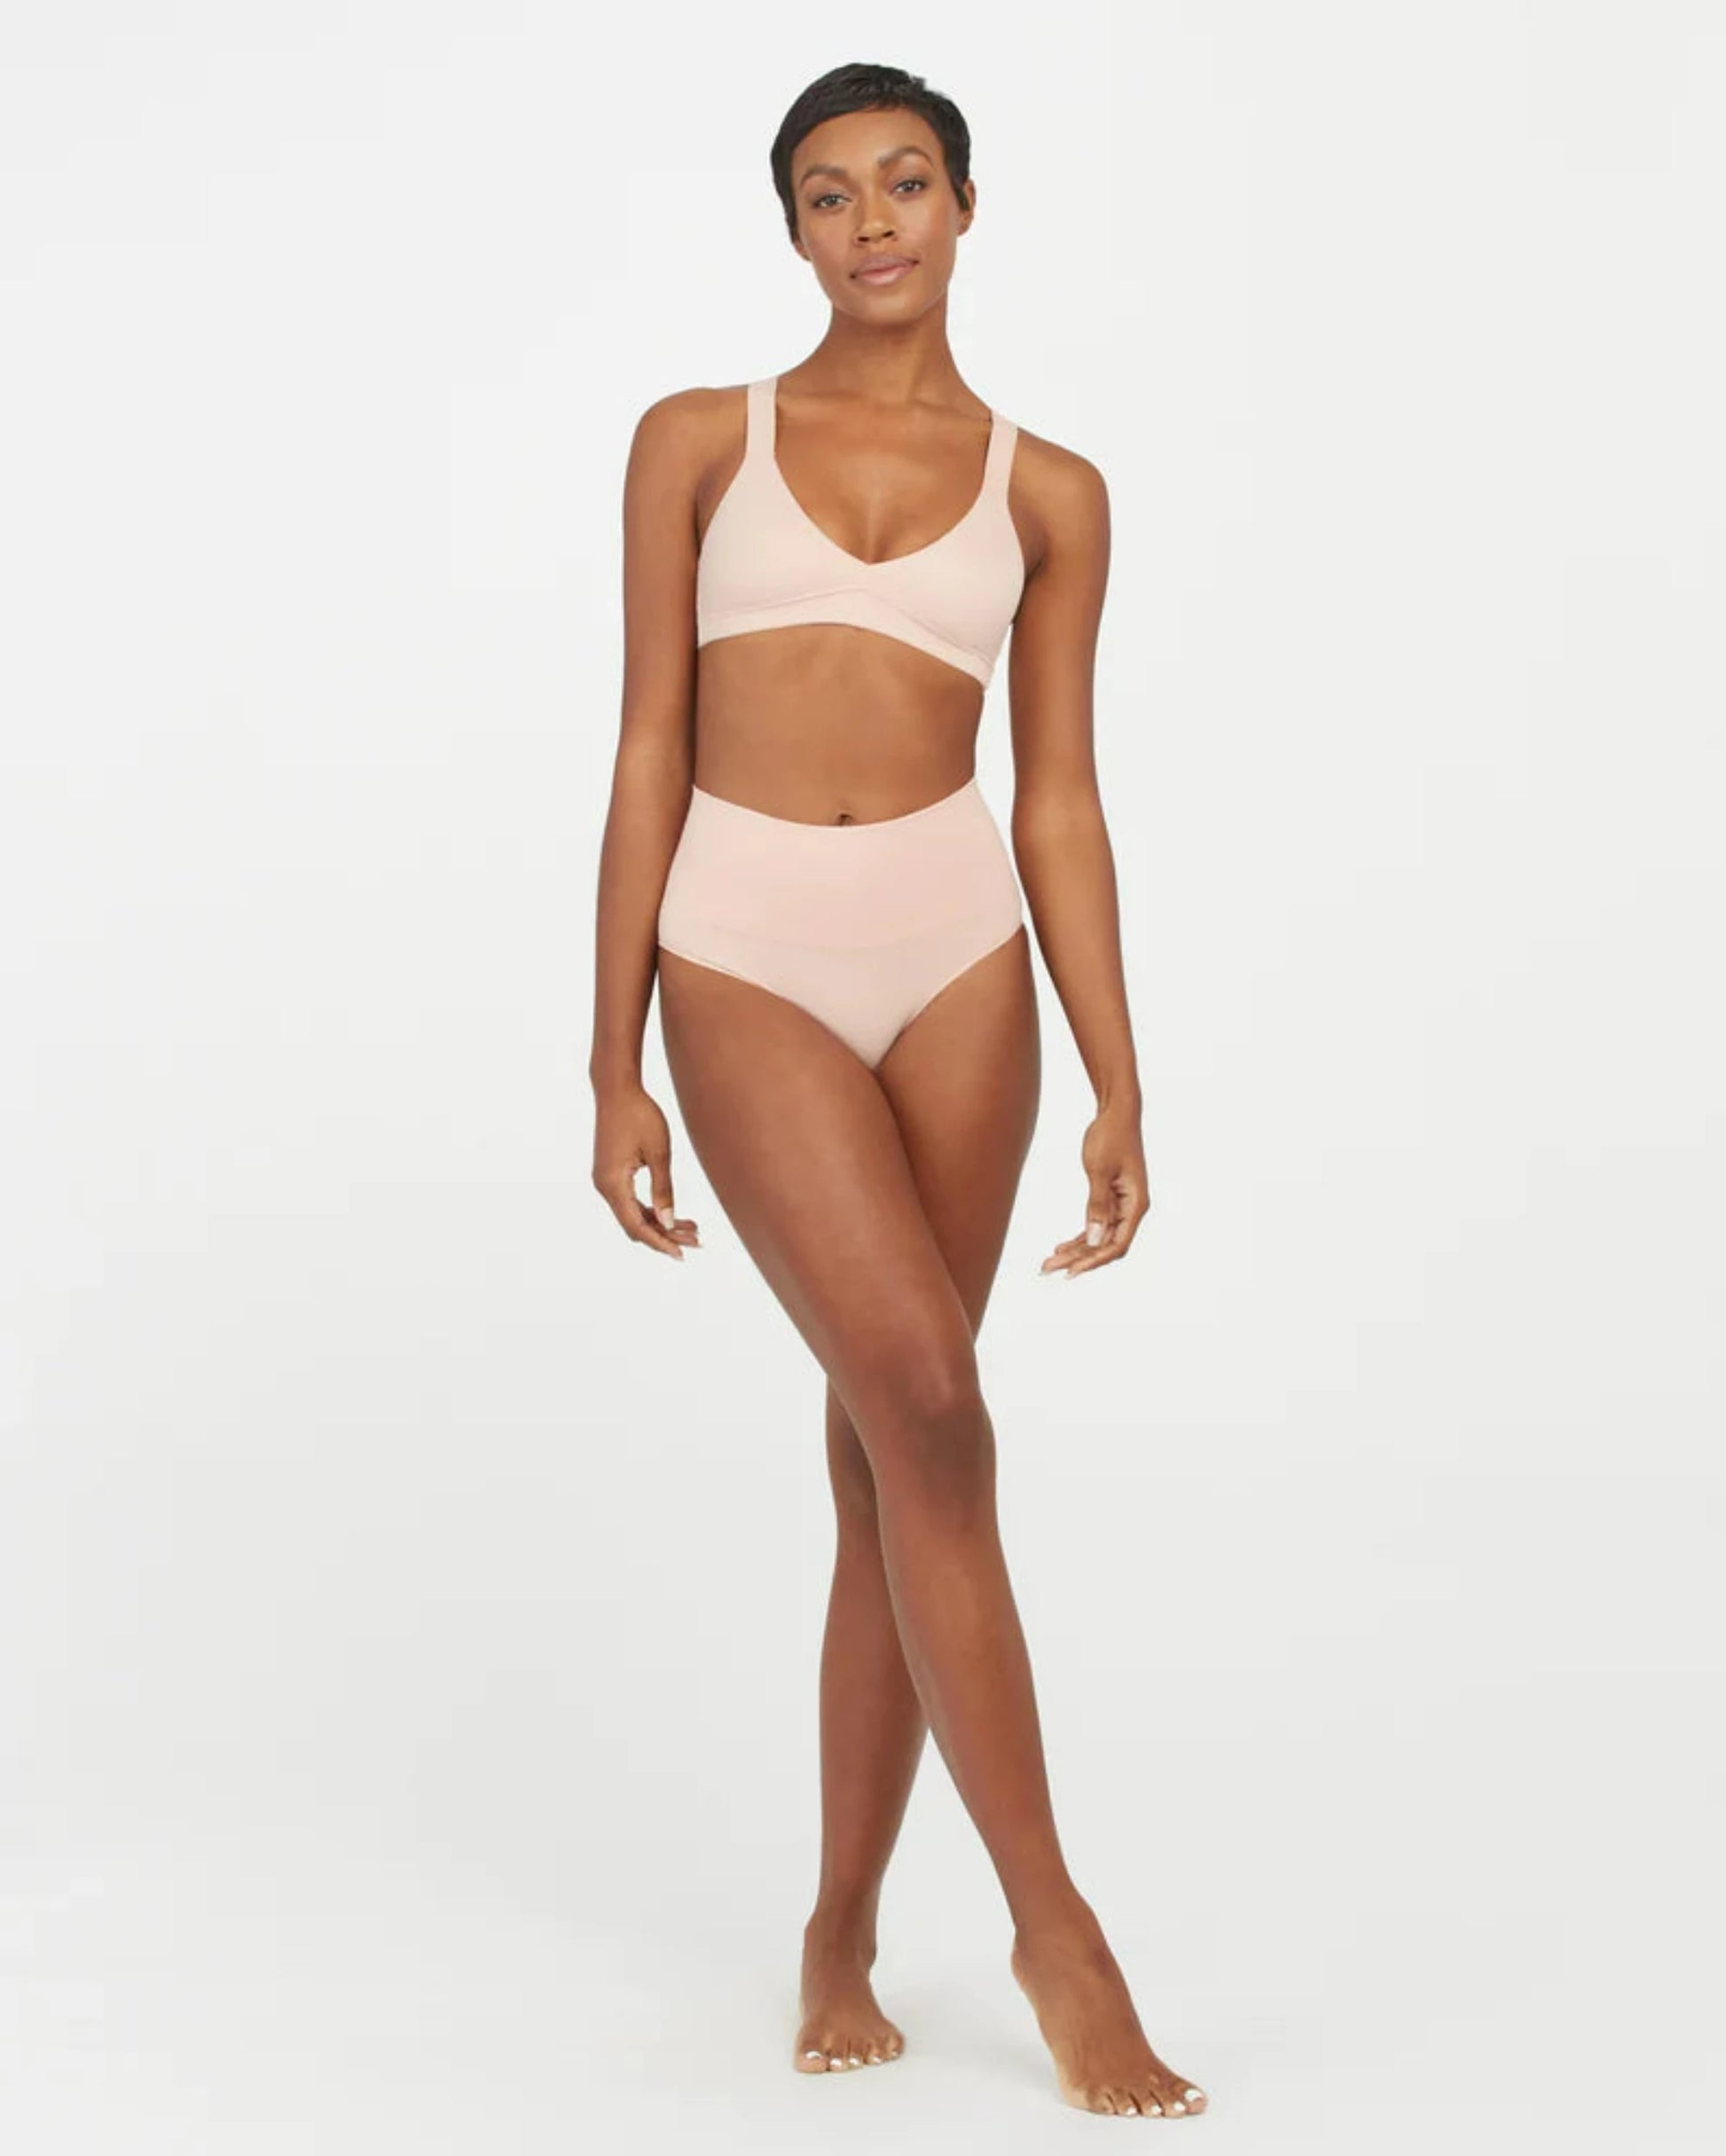 Everyday Shaping Panties Brief – L'Amour Lingerie